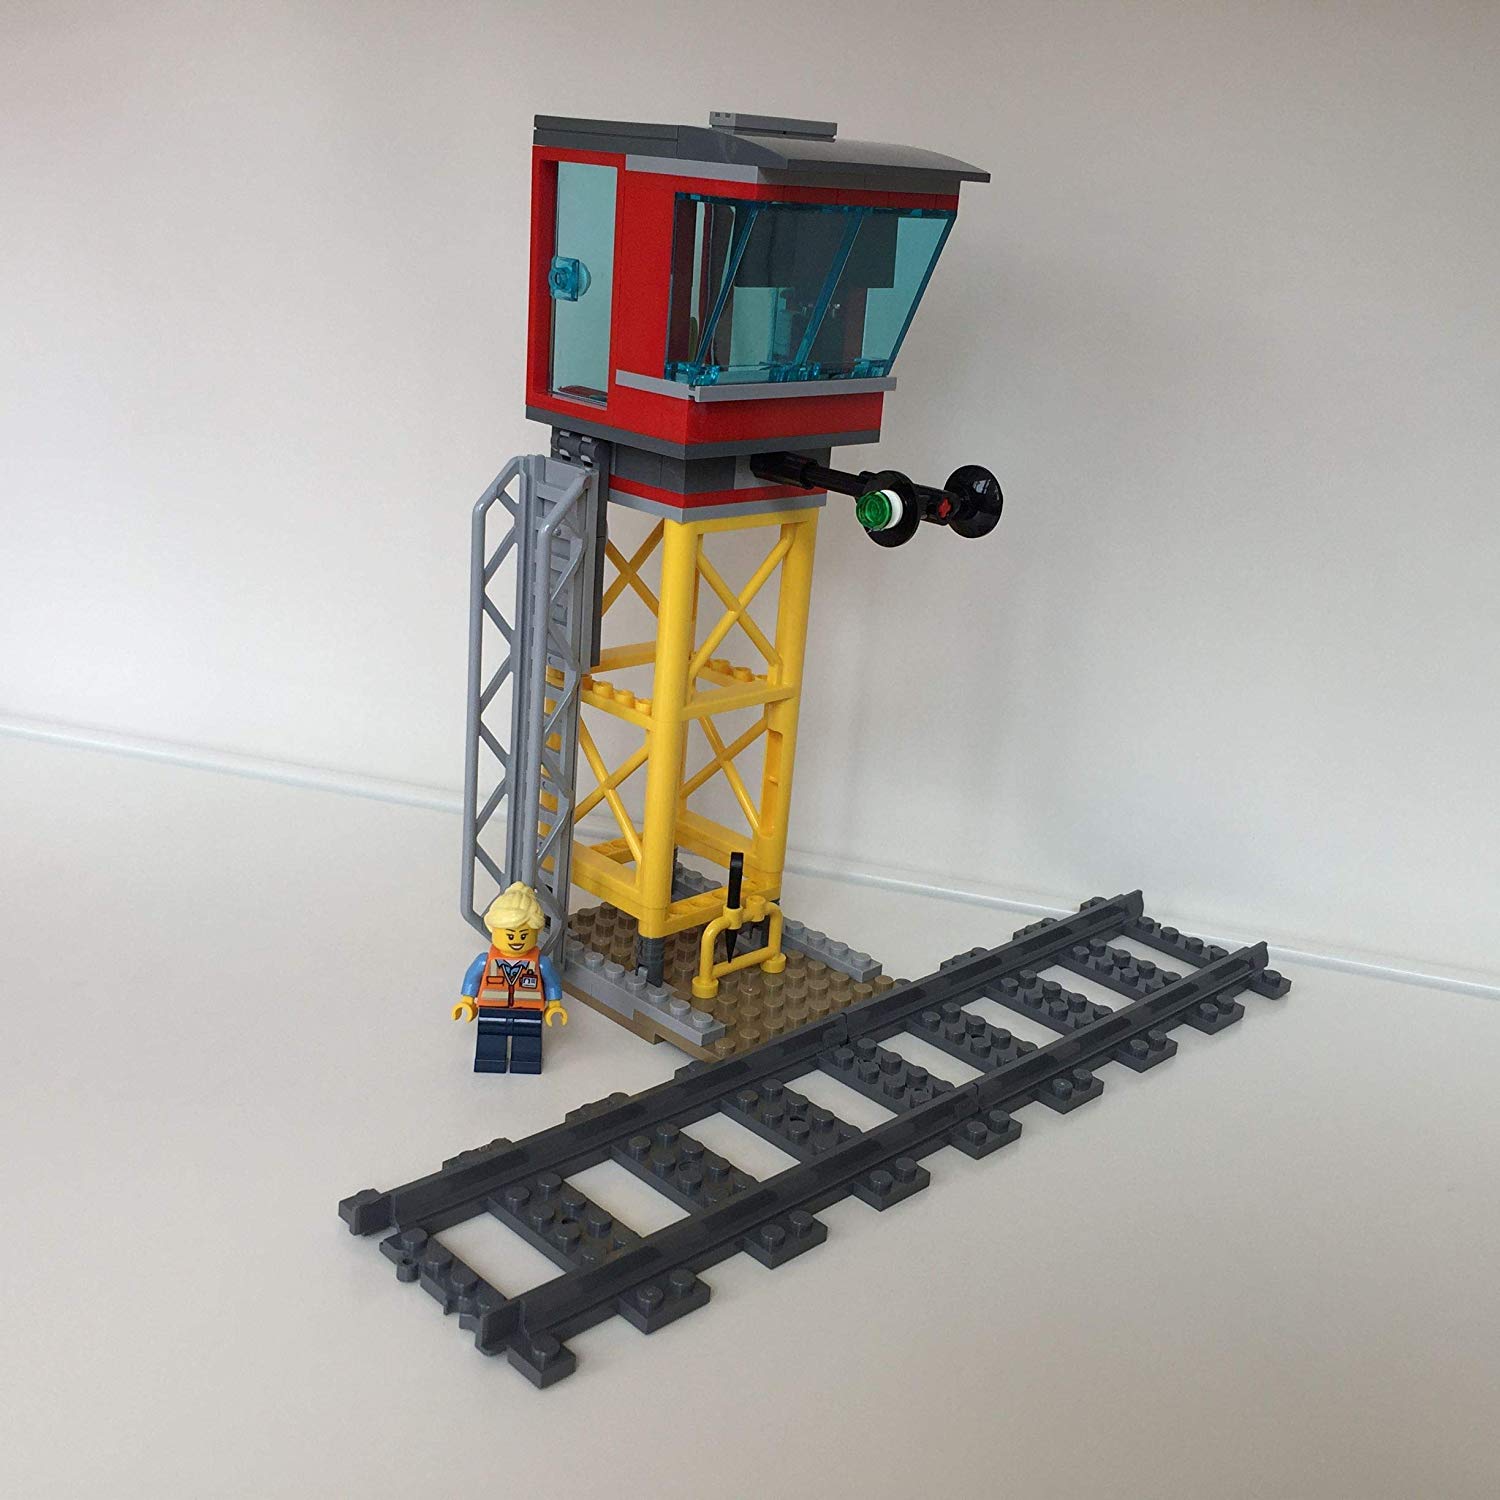 Genuine Lego City Train Station With Ladder And Signal Lights – 60198